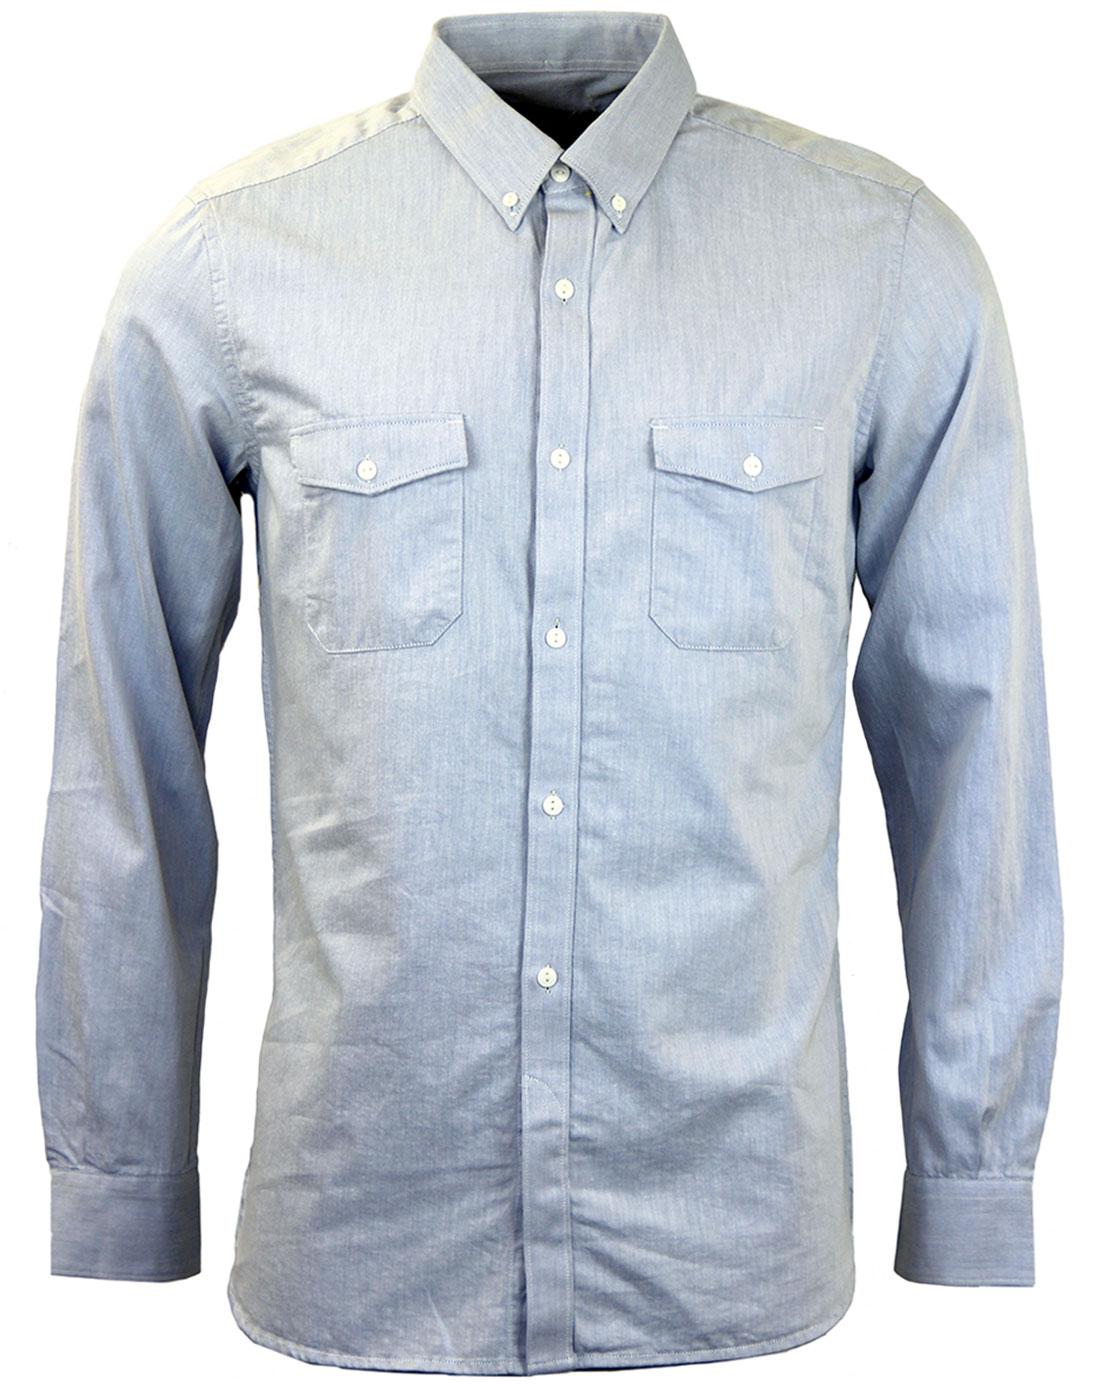 FRENCH CONNECTION Retro Mod Button Down Pocket Shirt in Blue